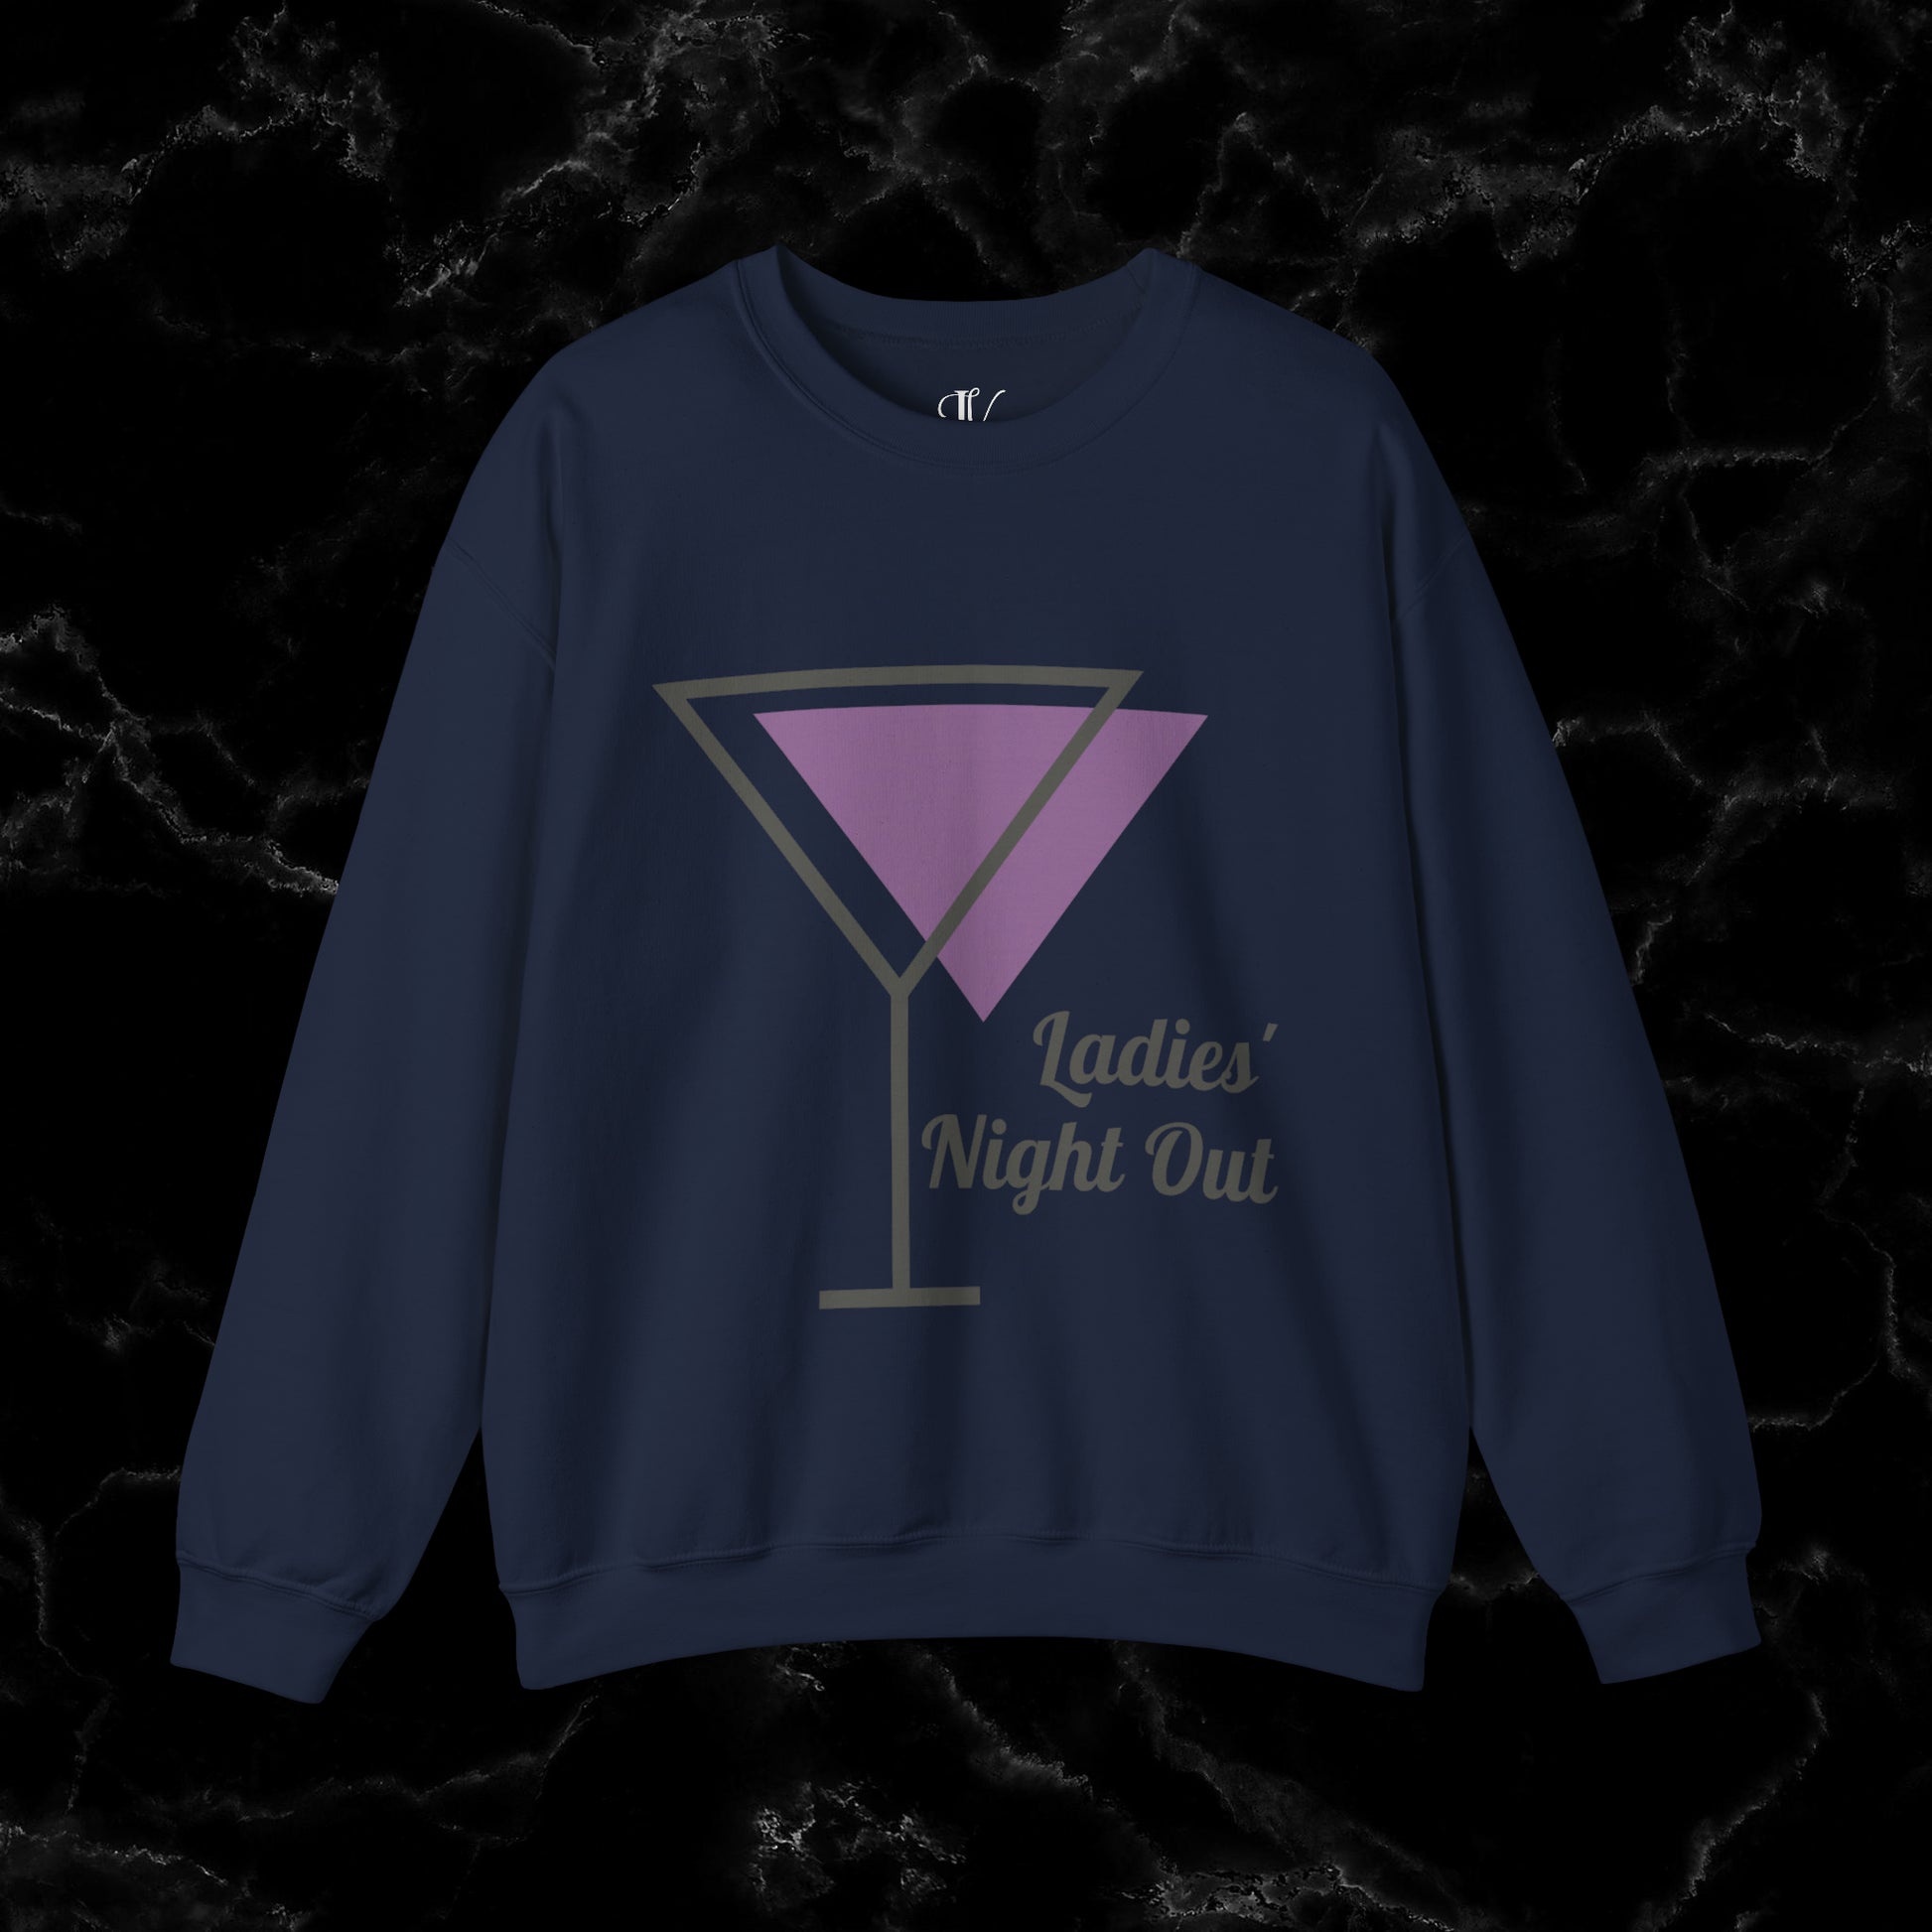 Ladies' Night Out - Dirty Martini Social Club Sweatshirt - Elevate Your Night Out with Style and Sass in this Chic and Comfortable Sweatshirt! Sweatshirt S Navy 